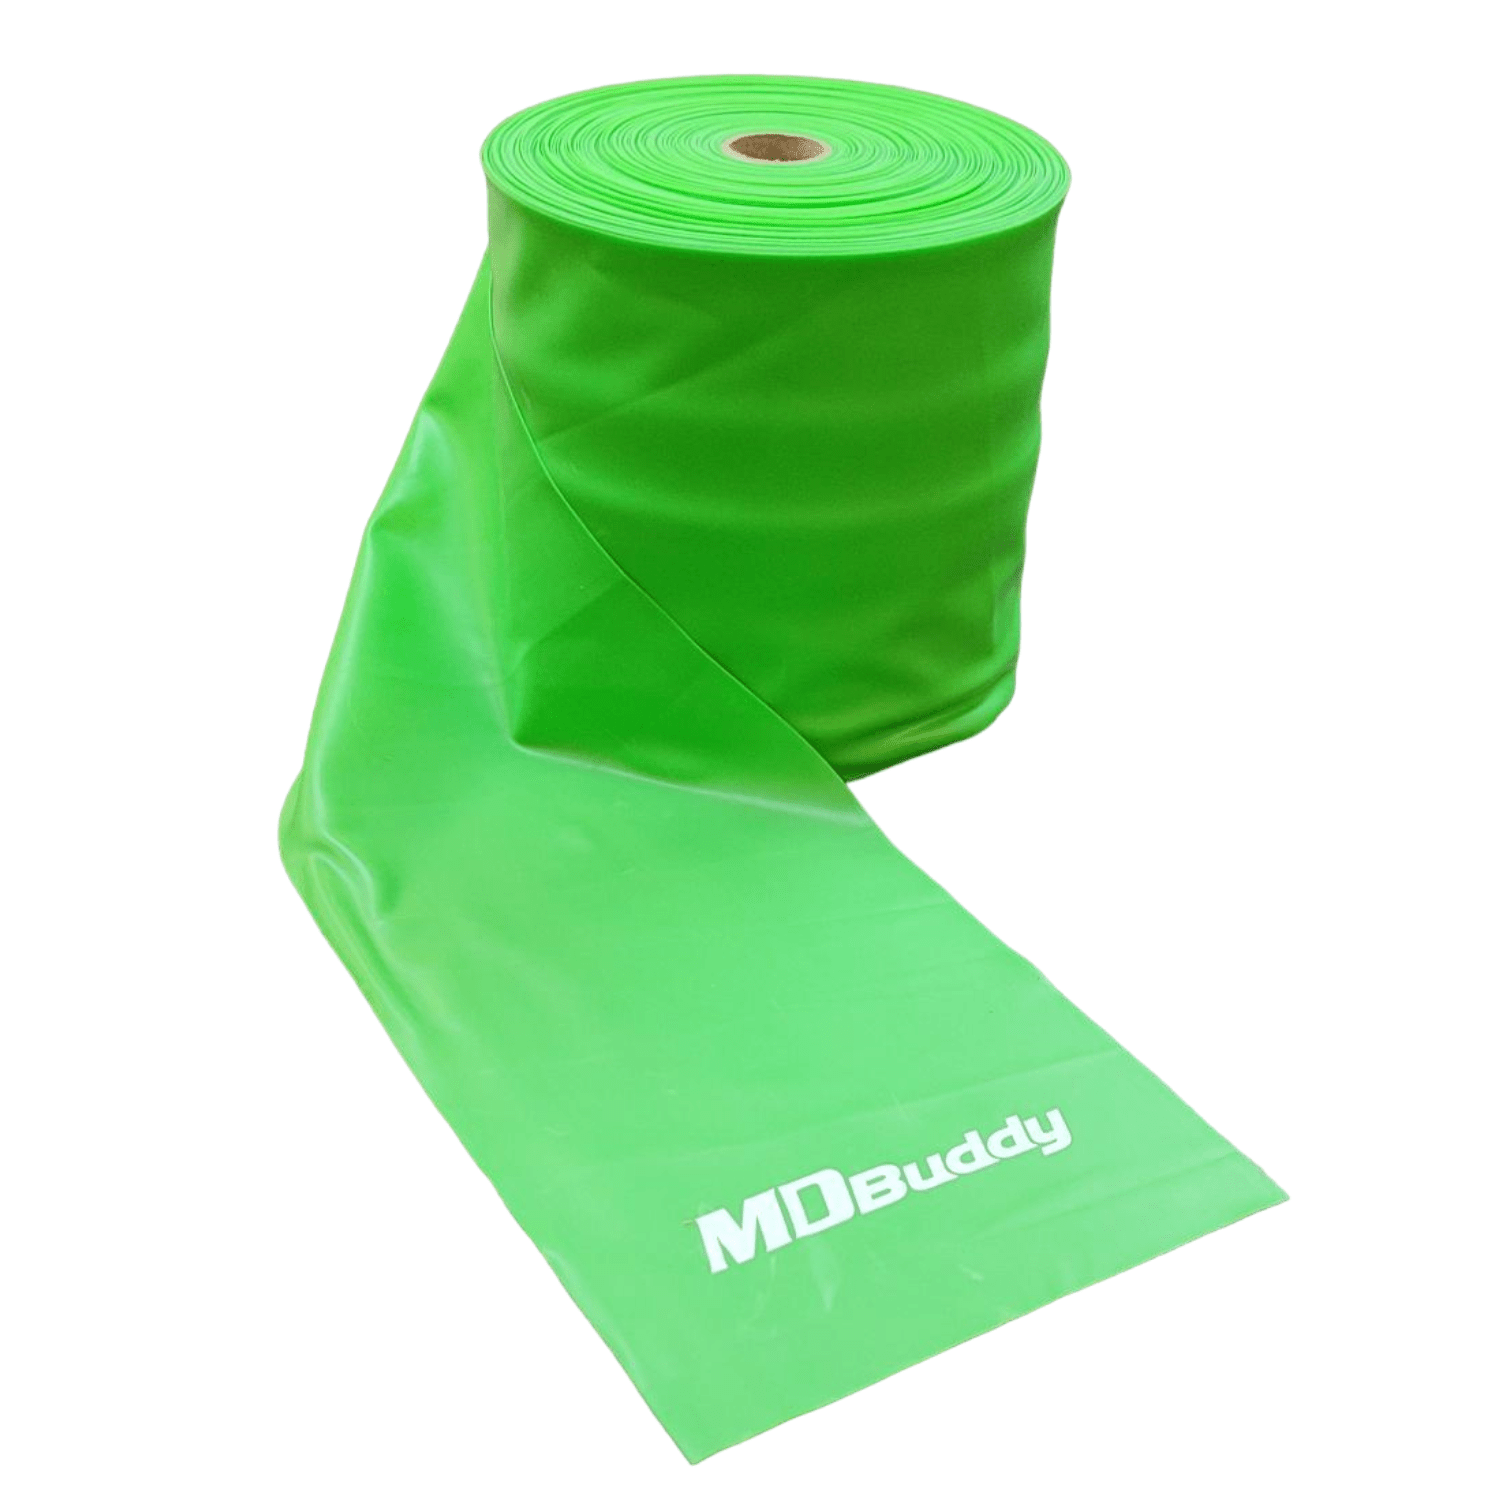 MD Buddy Latex Free 50M Roll Of Bands-50M Roll Bands-MD Buddy-3